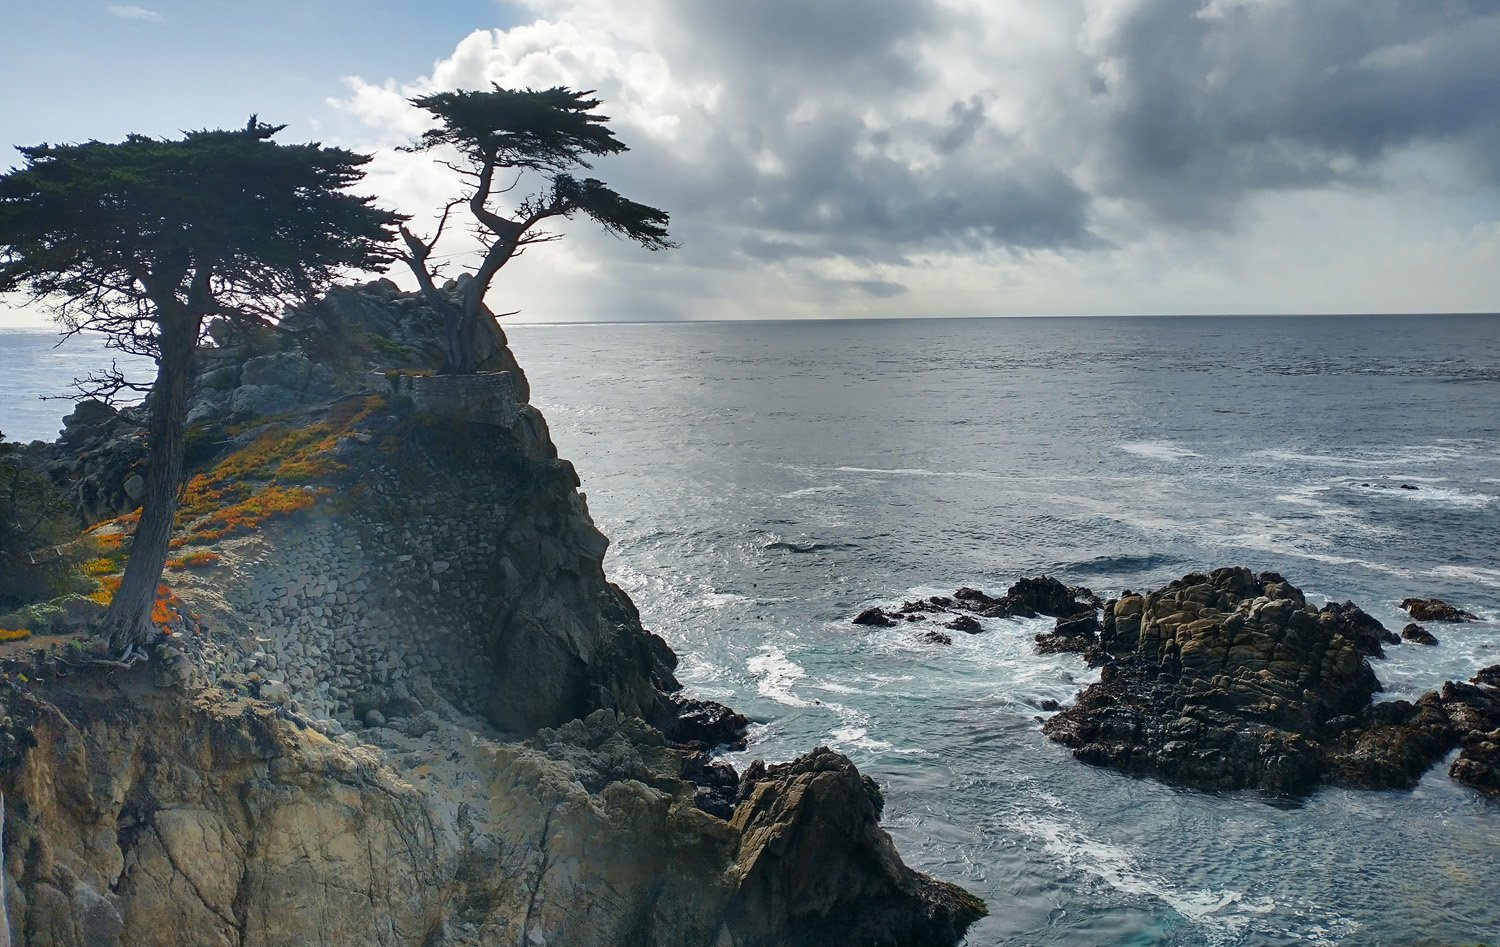 Little outlook with the lone Cypress tree watching over the cliffs.